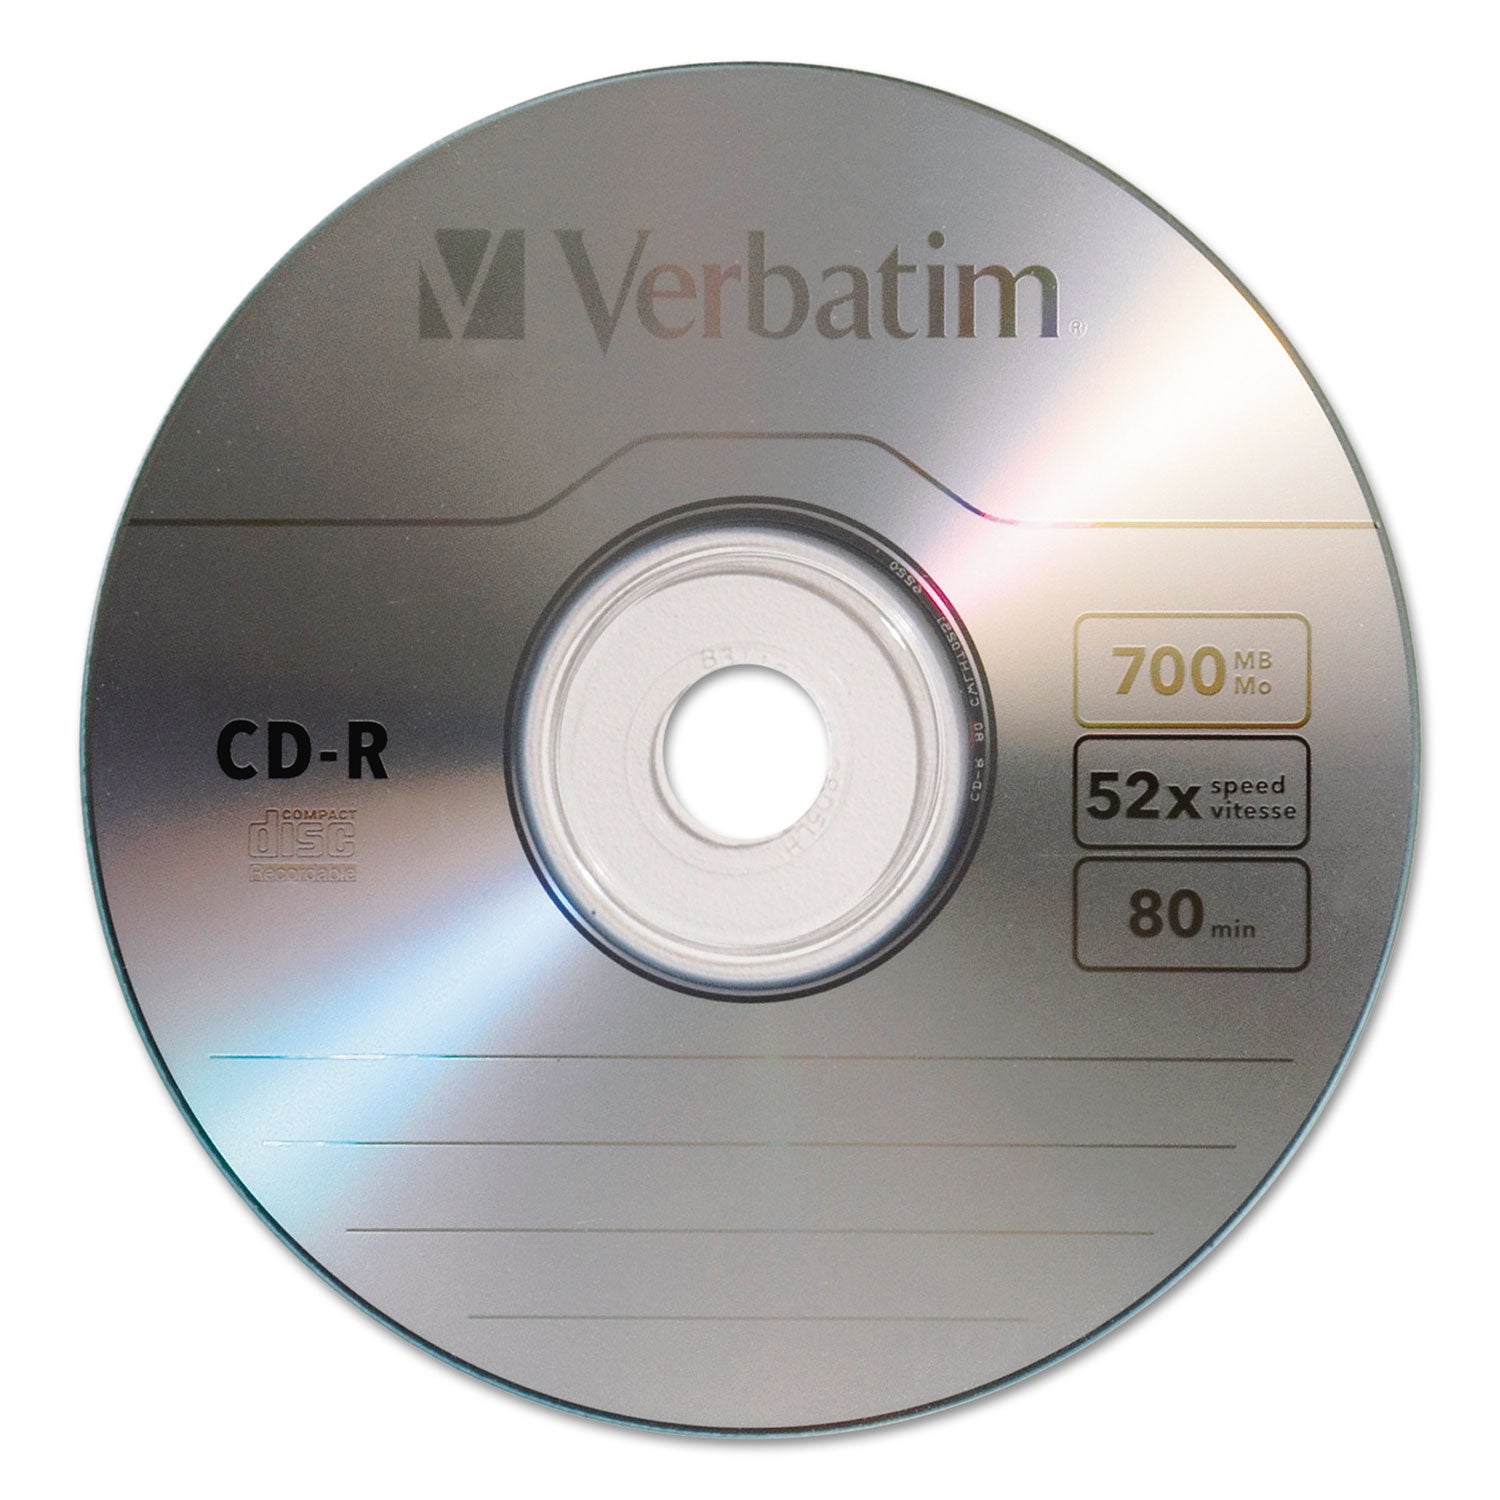 CD-R Recordable Disc, 700 MB/80min, 52x, Spindle, Silver, 50/Pack - 